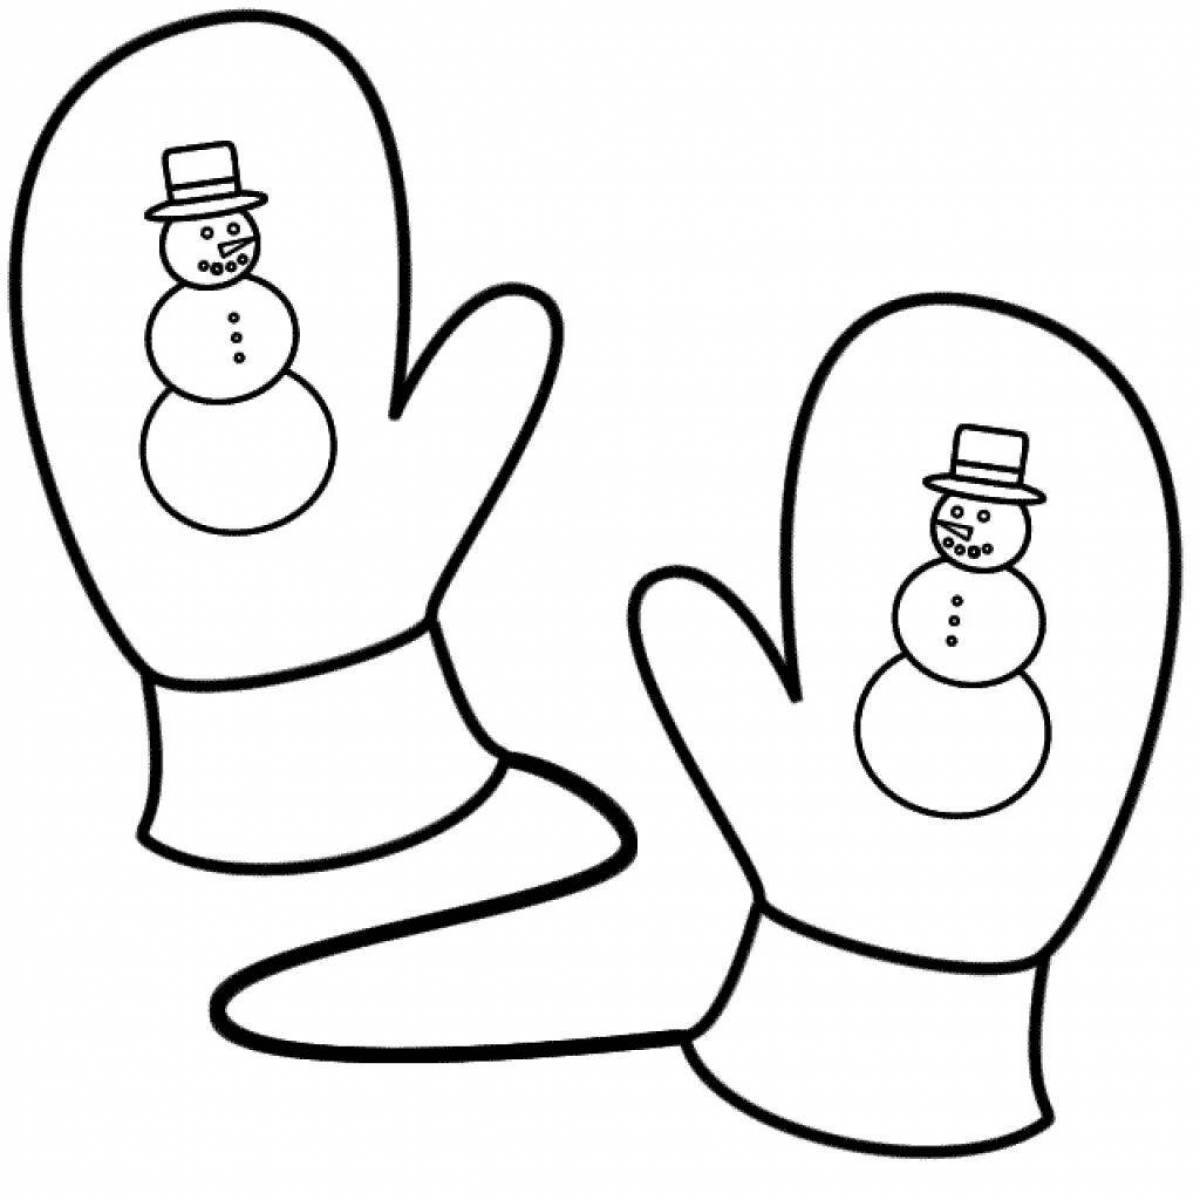 Coloring funny rubber mittens